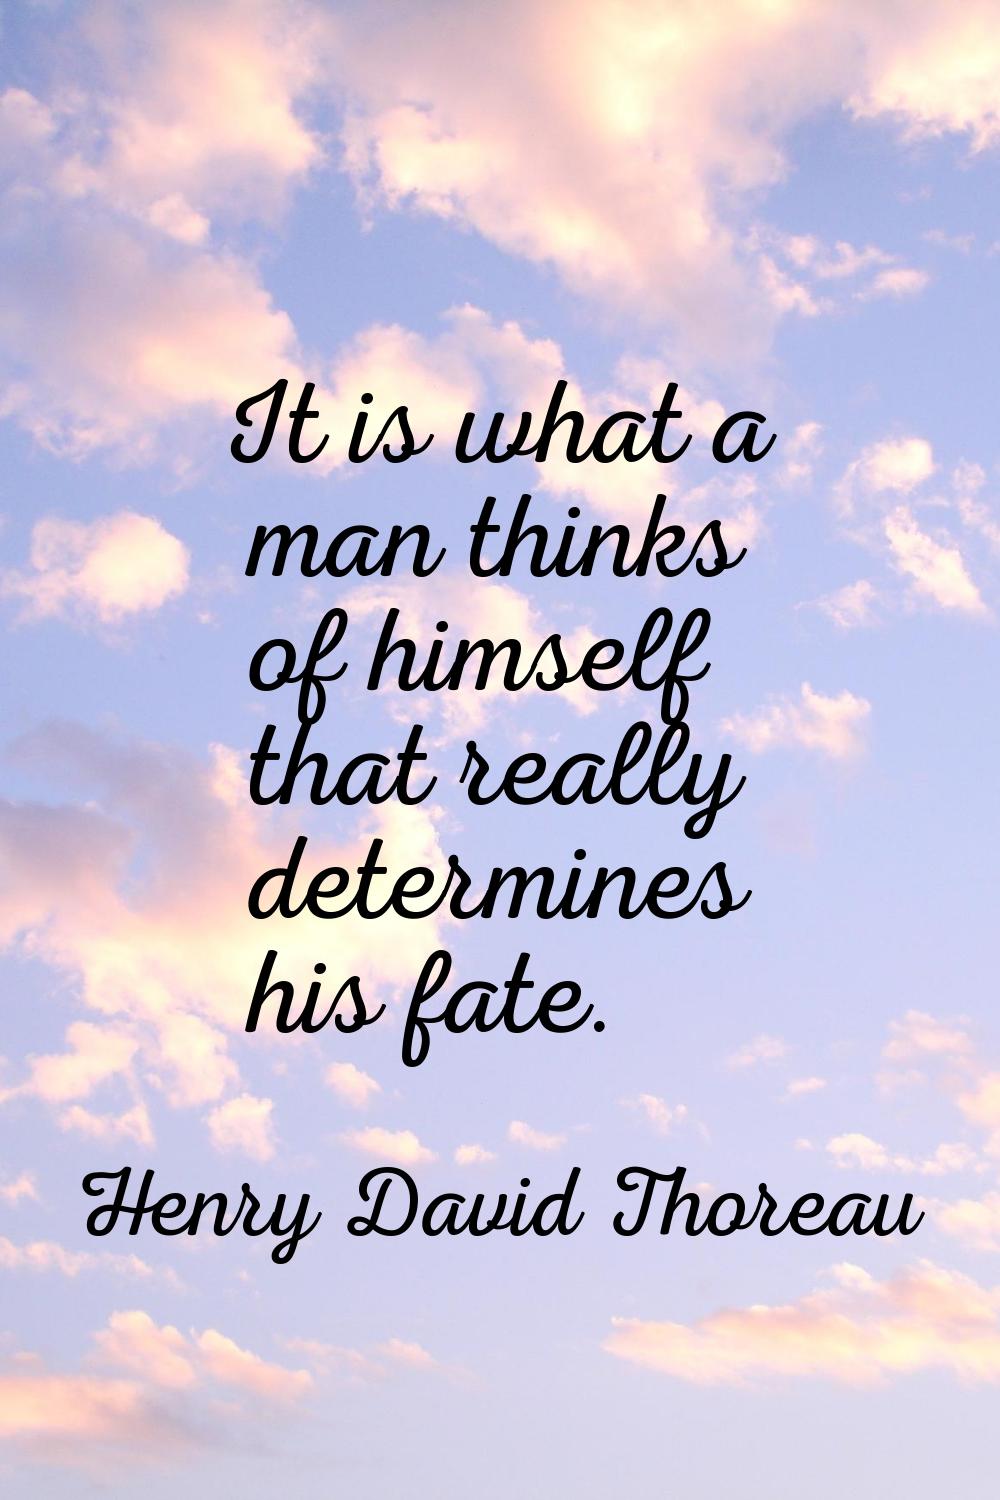 It is what a man thinks of himself that really determines his fate.